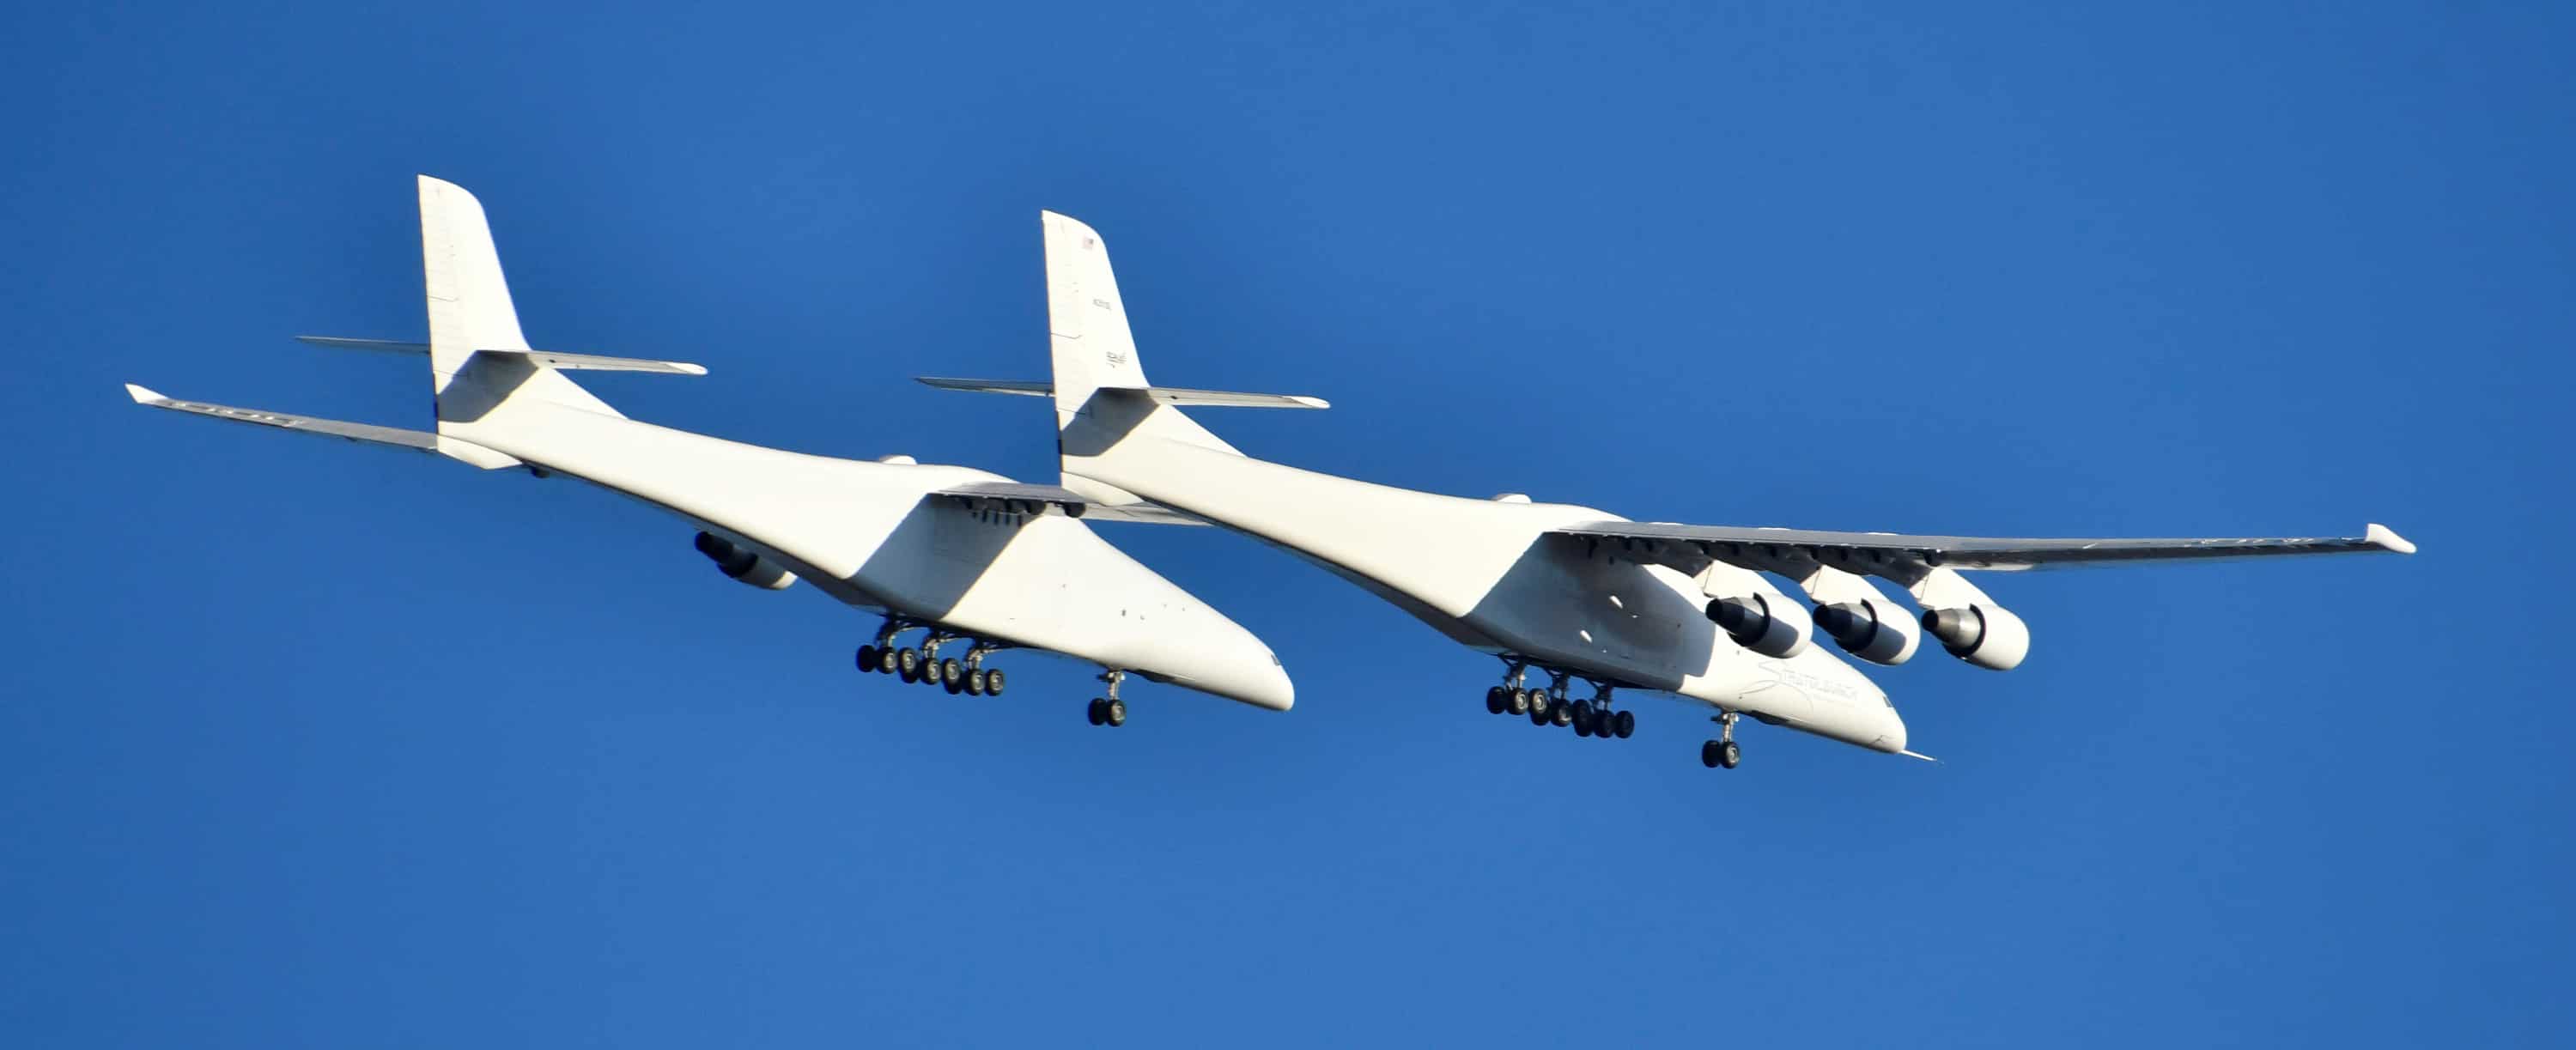 World`s largest aircraft Roc: Higher demand expected